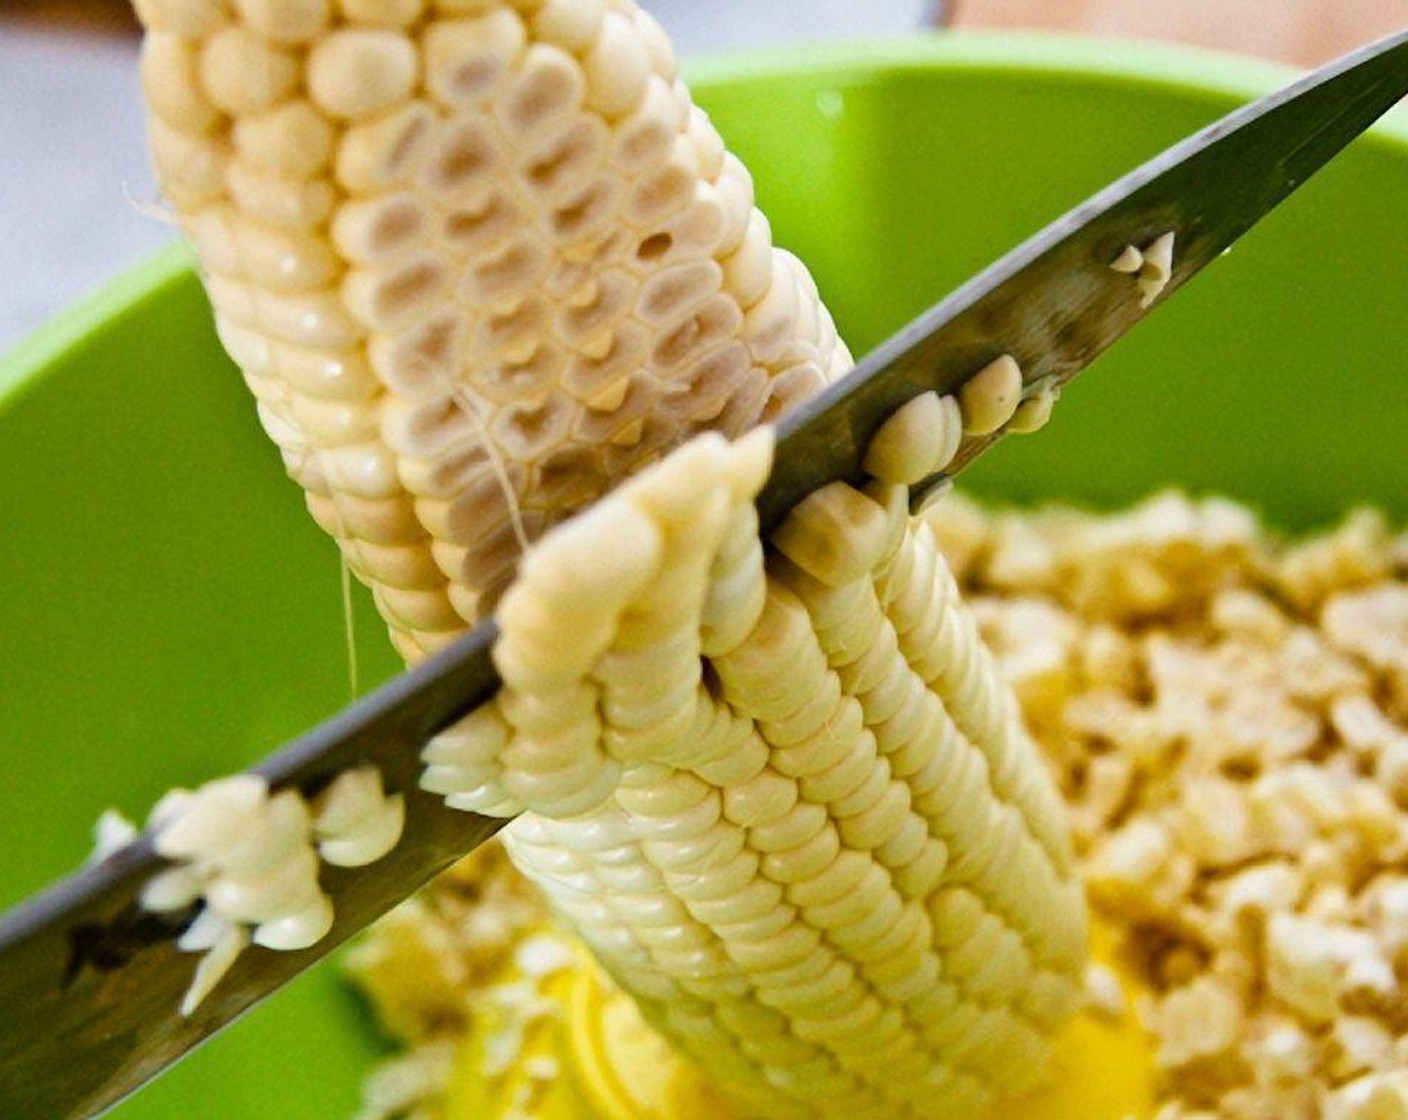 step 4 After the kernels are sliced away, gently scrape the cobs with your knife to catch some of the corn "milk."